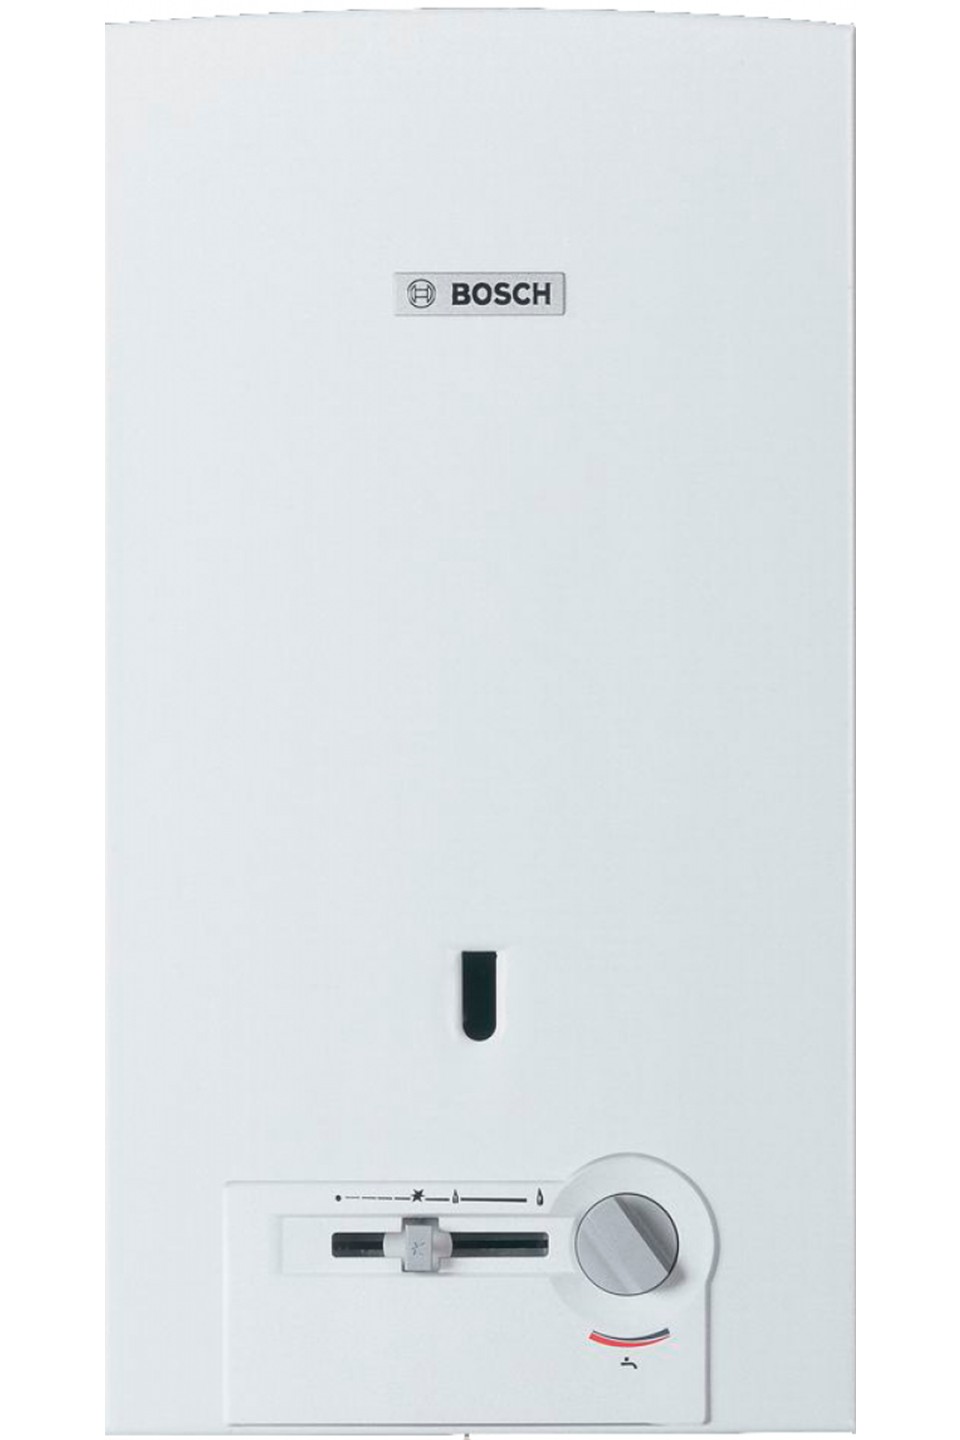 Bosch Therm 4000 O WR 10-2 P (7701331615)